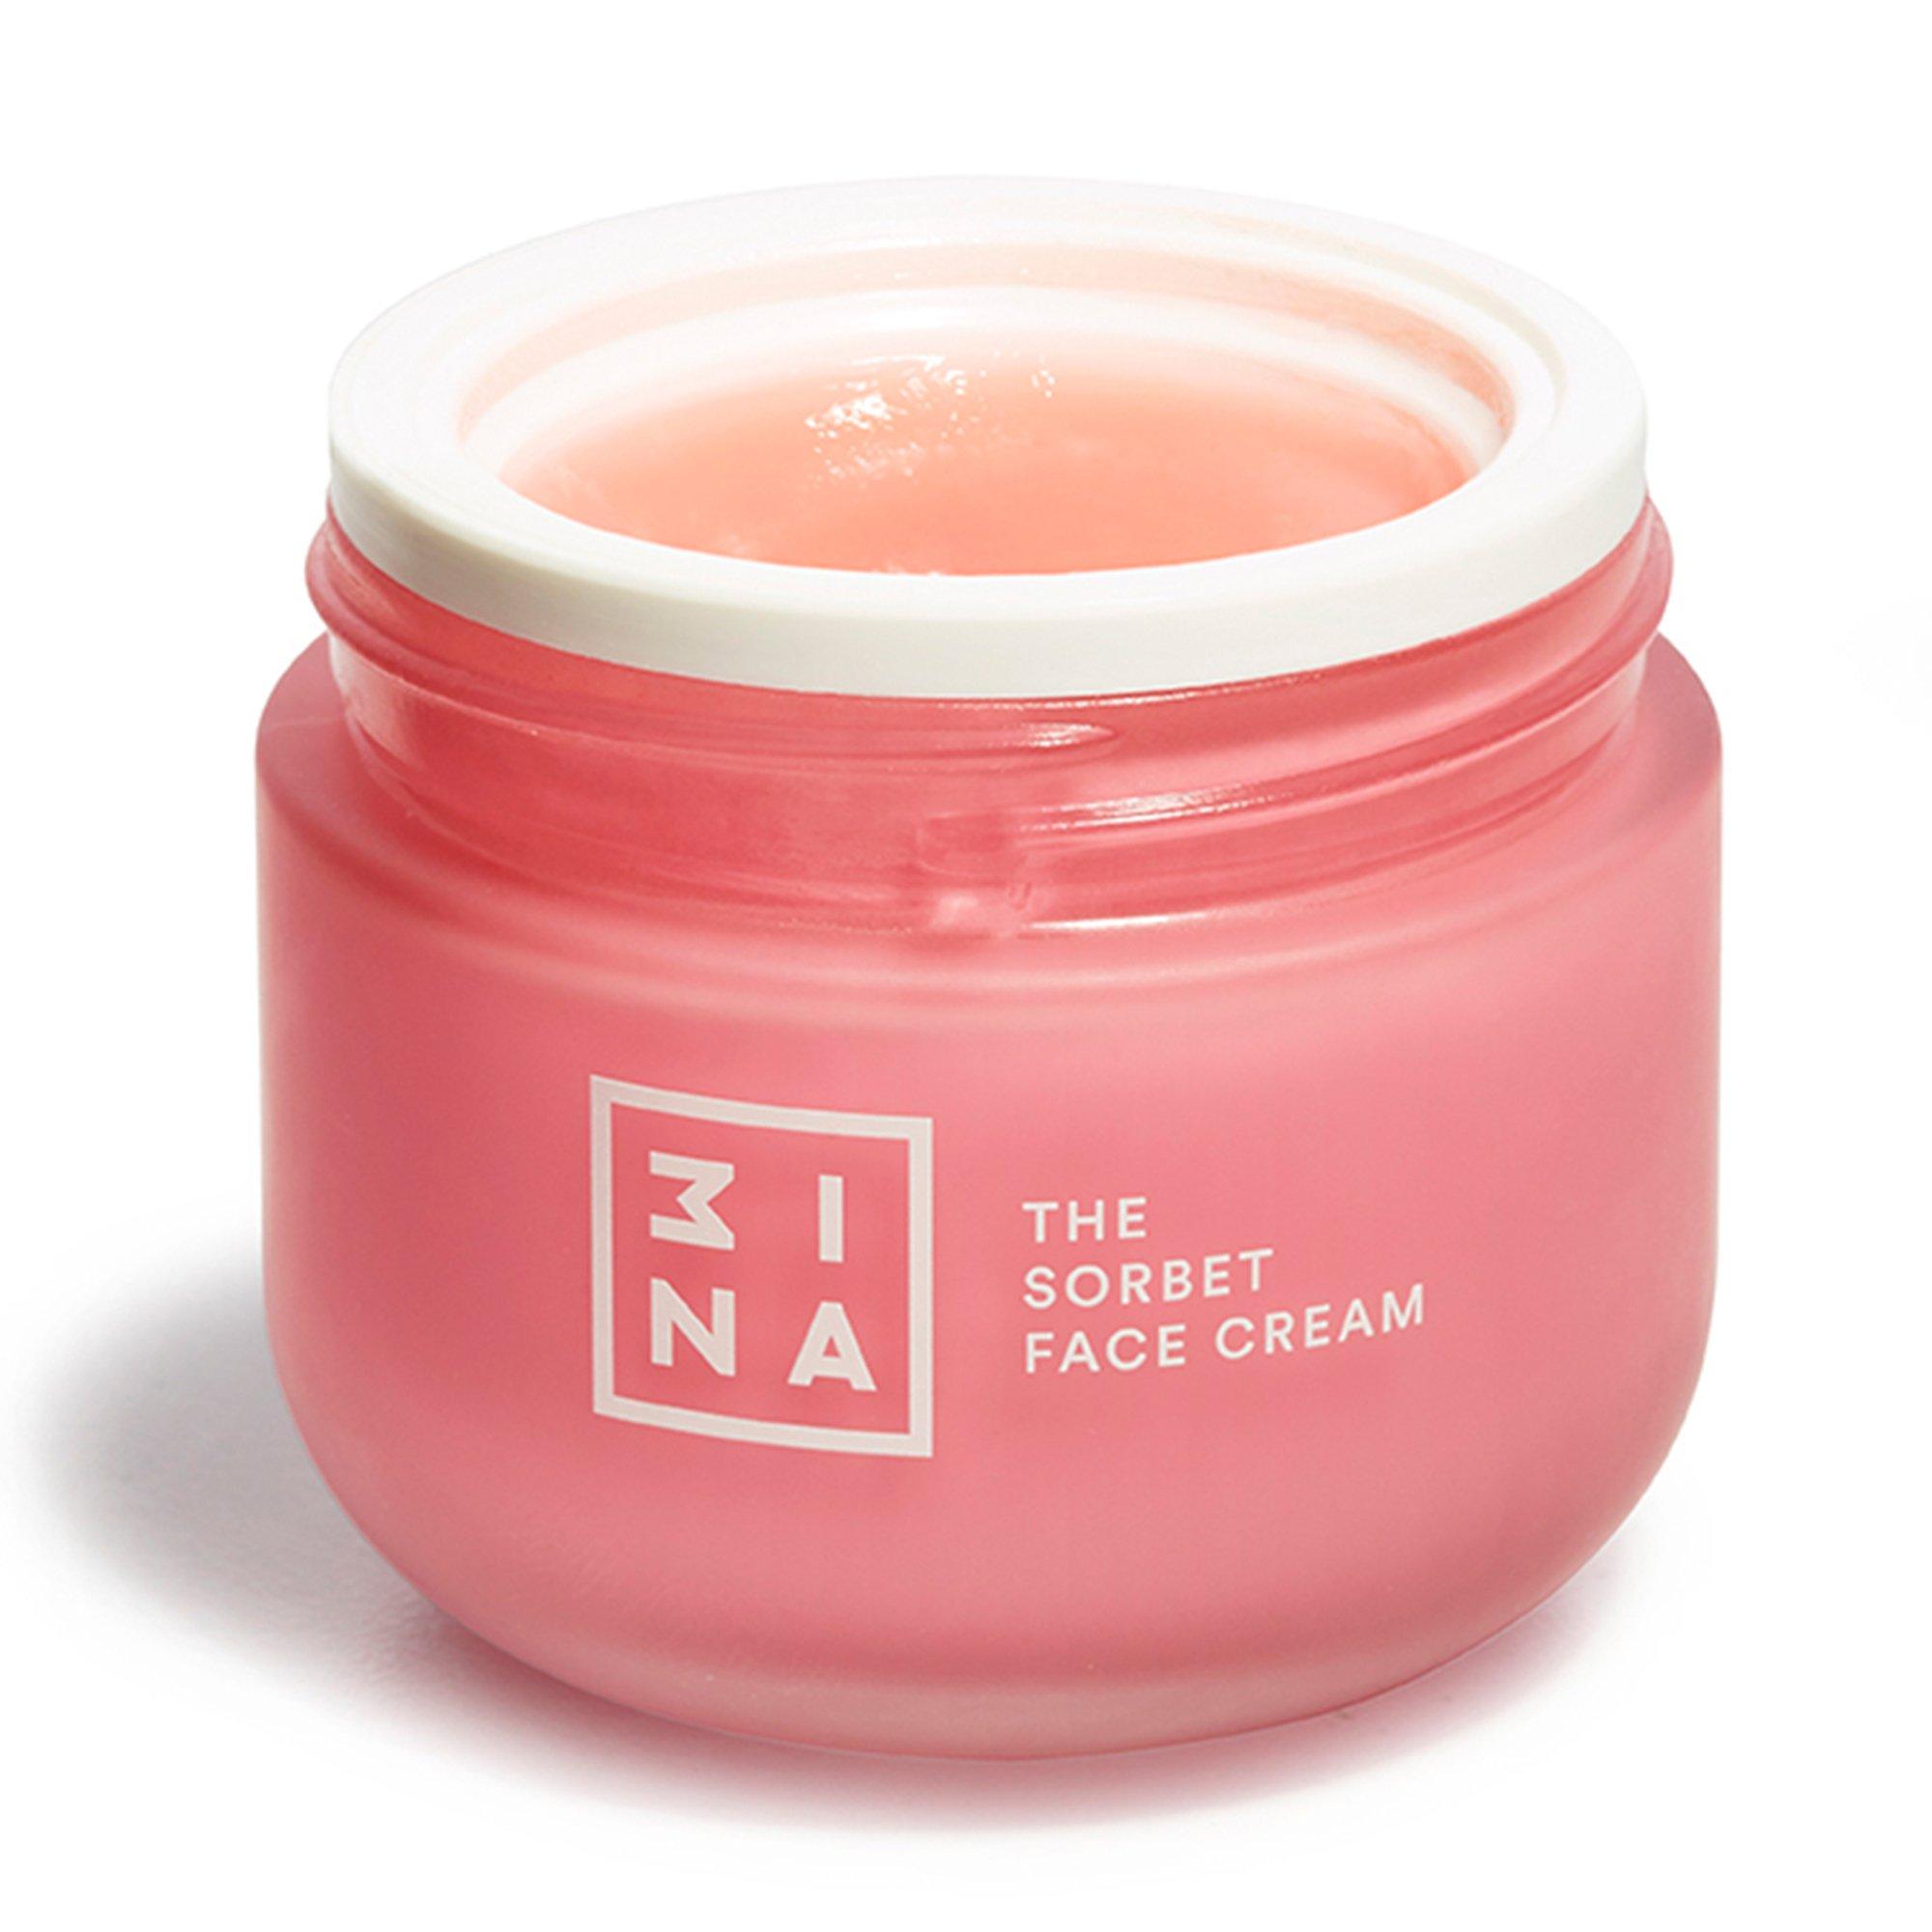 Image of 3INA The Sorbet Face Cream - 50ml